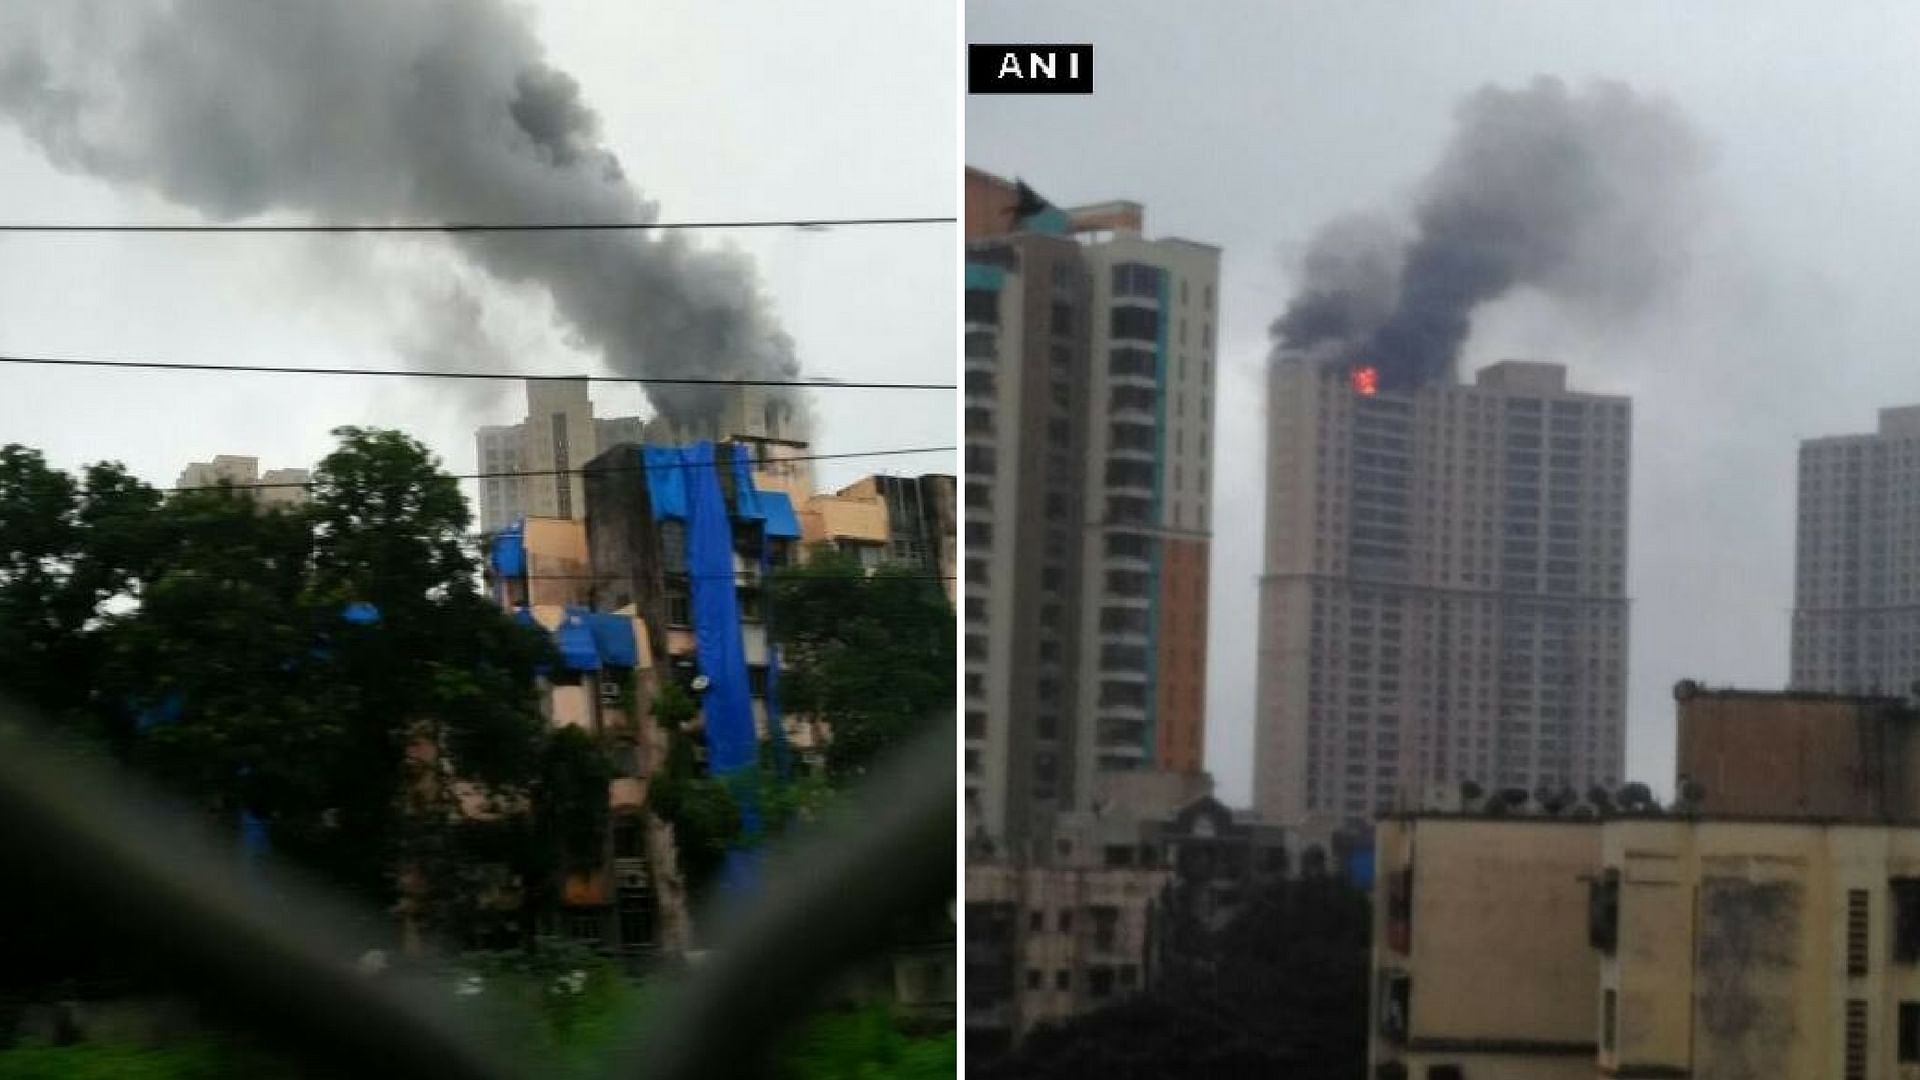 Cause of the fire is unknown as of now. (Photo Courtesy: Twitter/<a href="https://twitter.com/ANI_news">@ANI_news</a>)